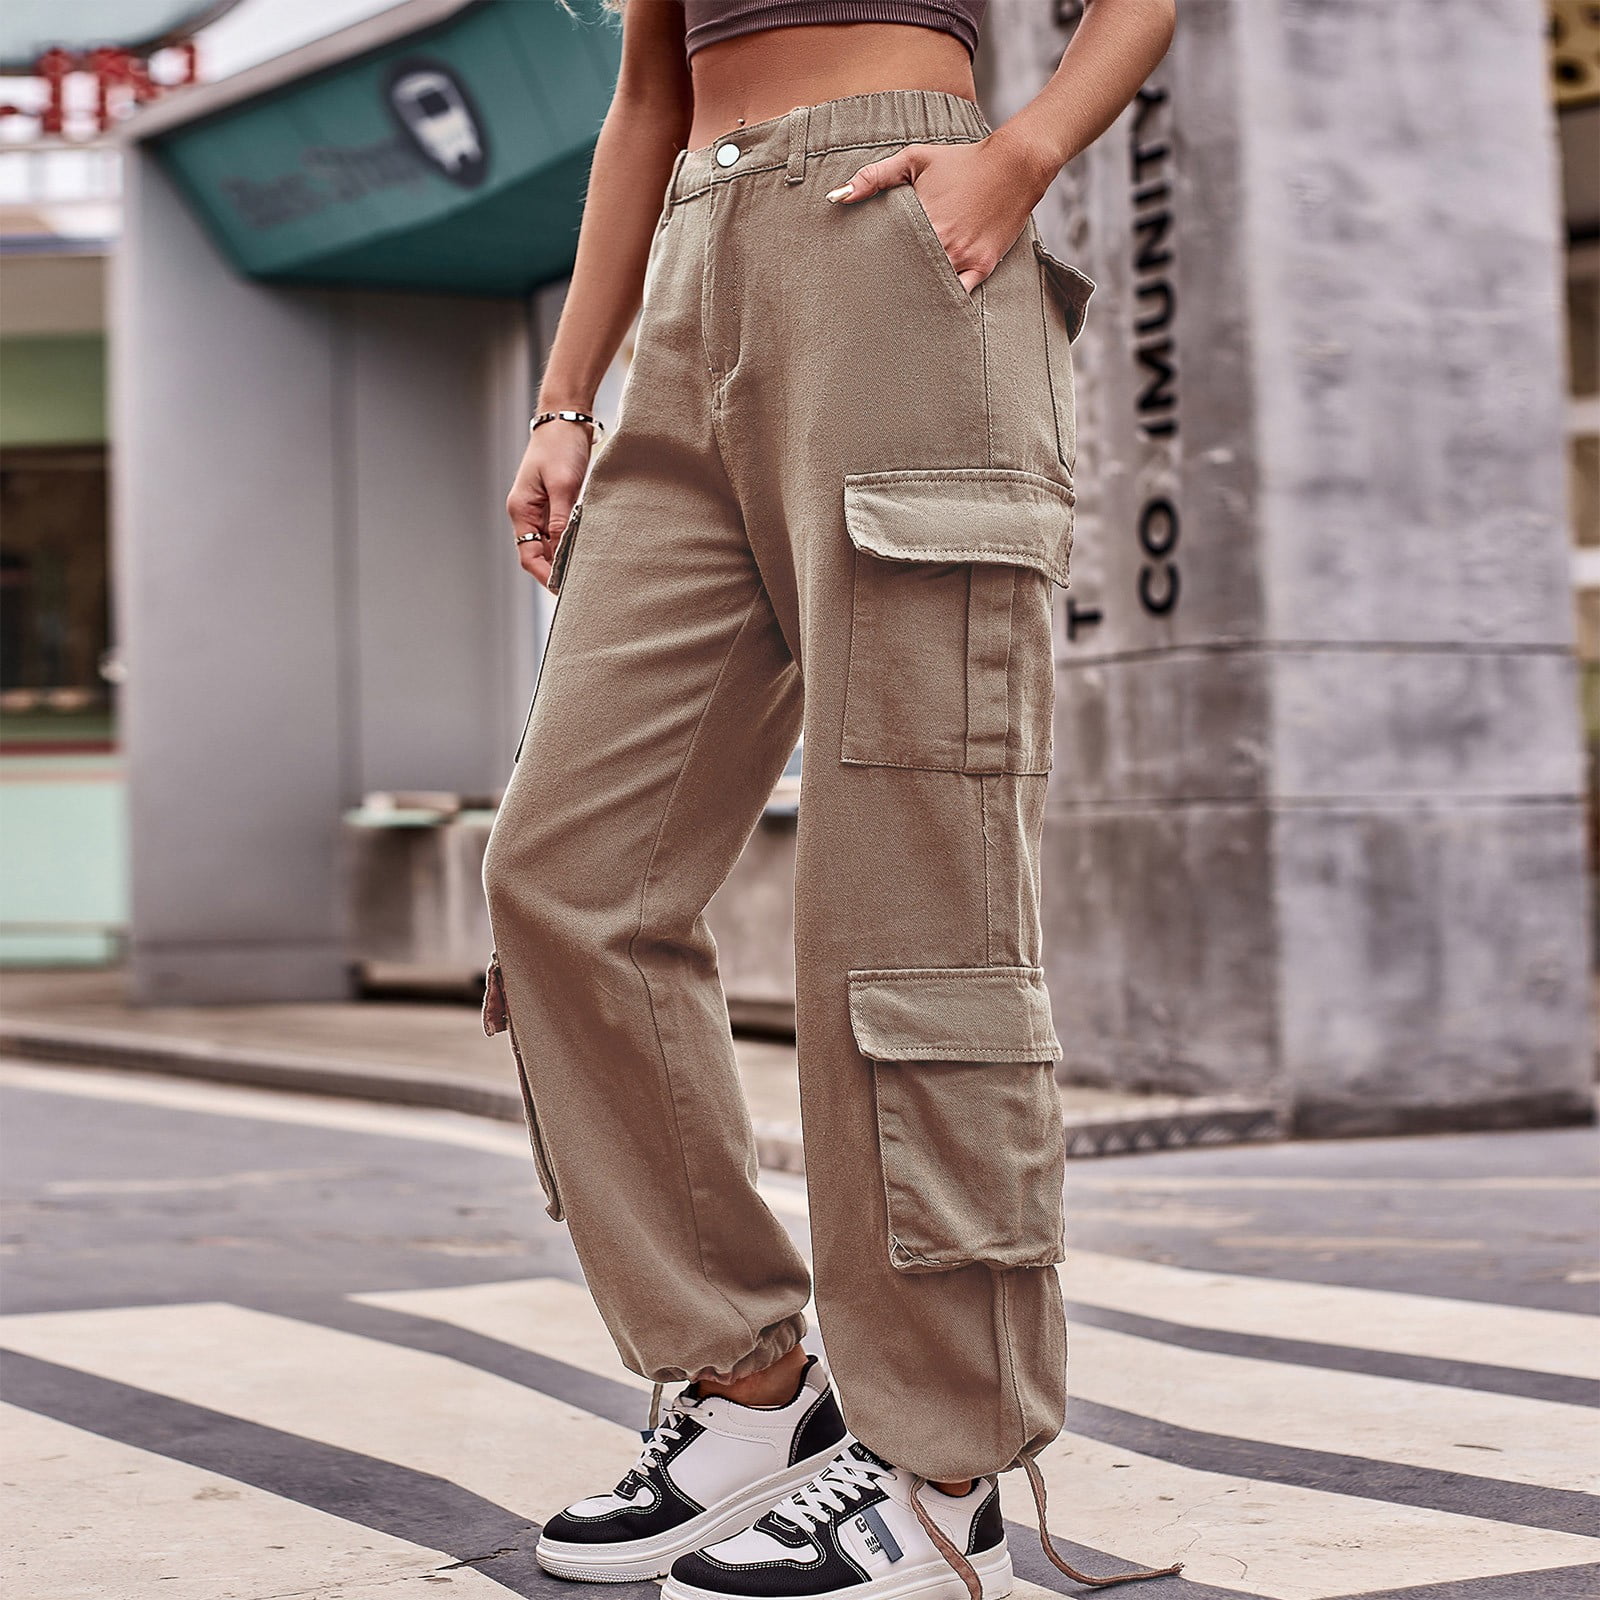 13 Cargo Pant Outfits That Will Make You Feel Like a Grown-Up Kim Possible